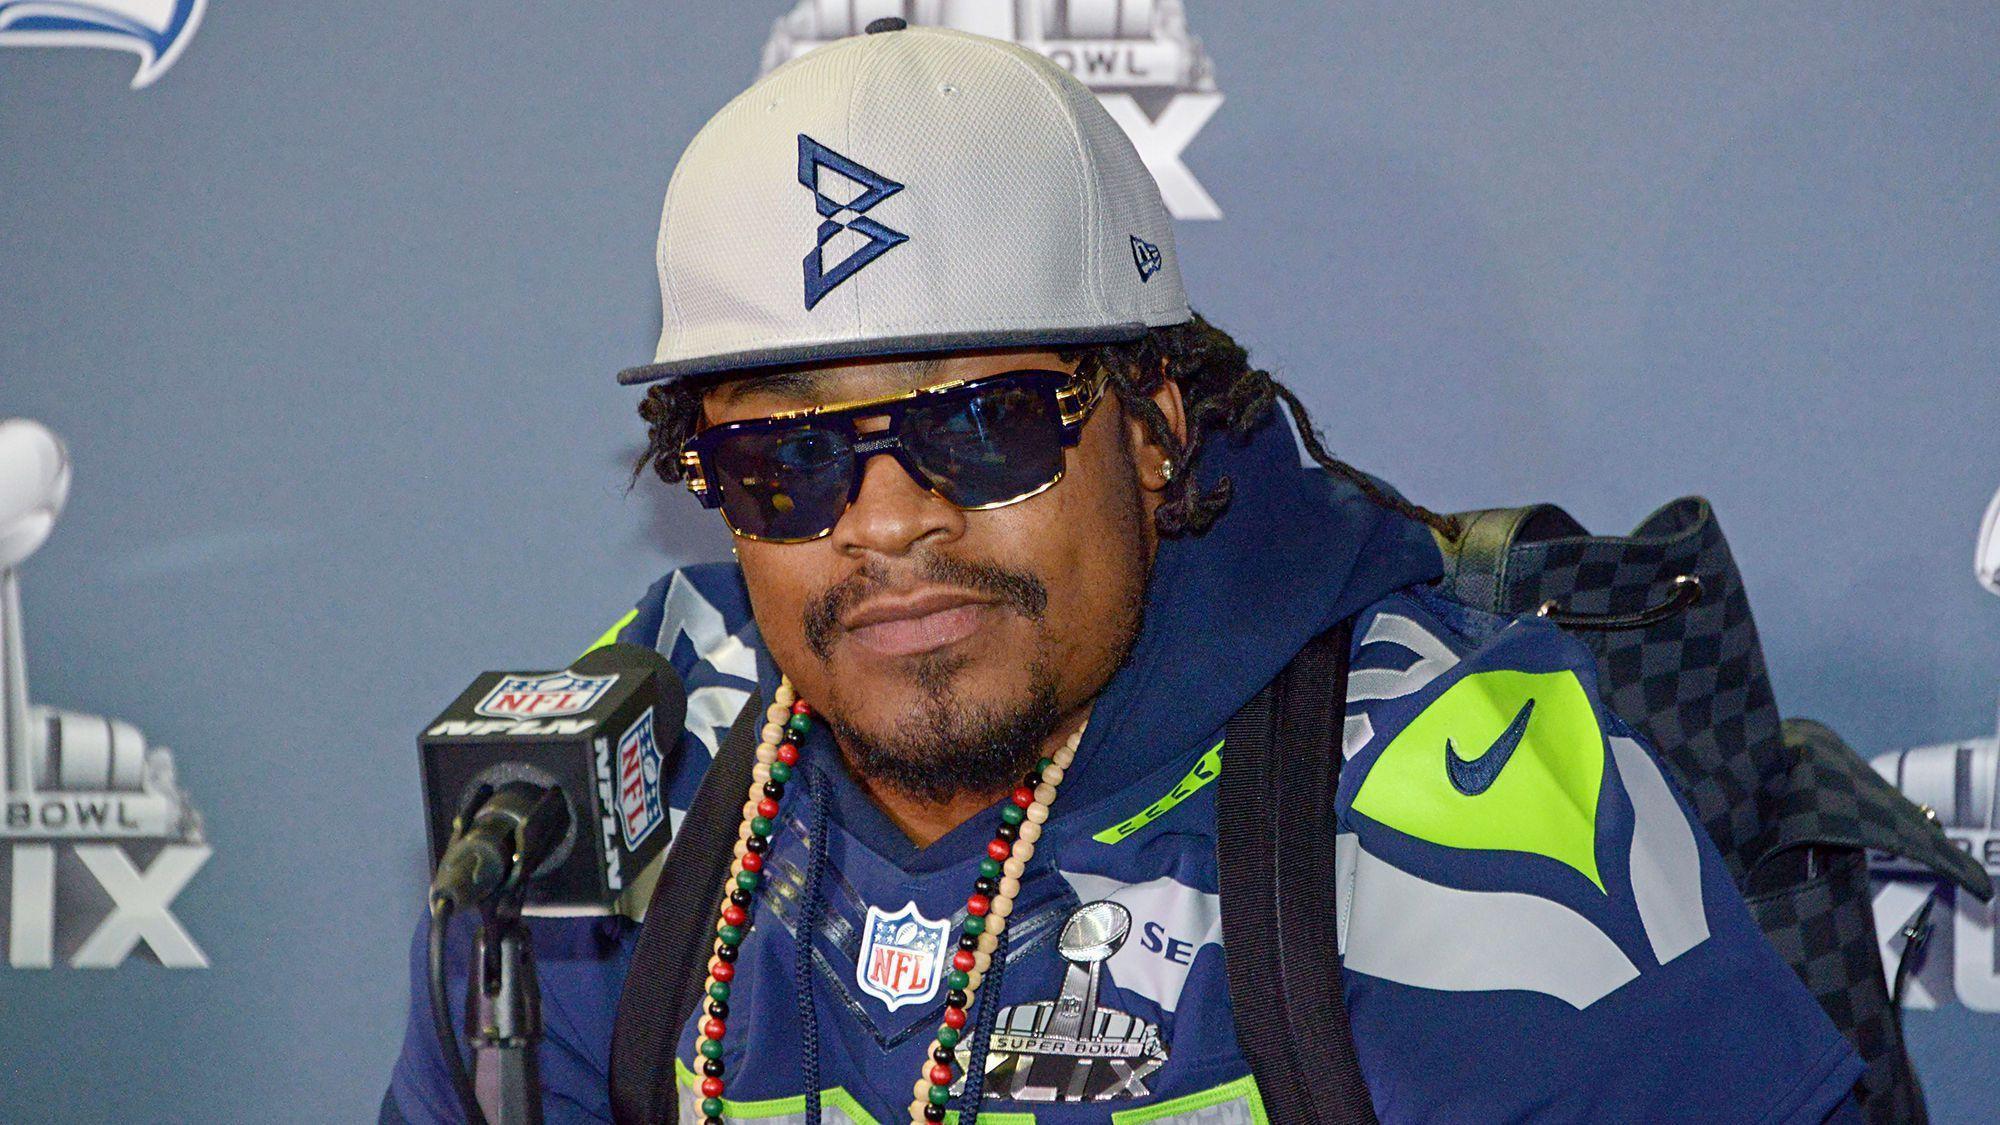 Marshawn lynch Wallpaper Image Photo Picture Background